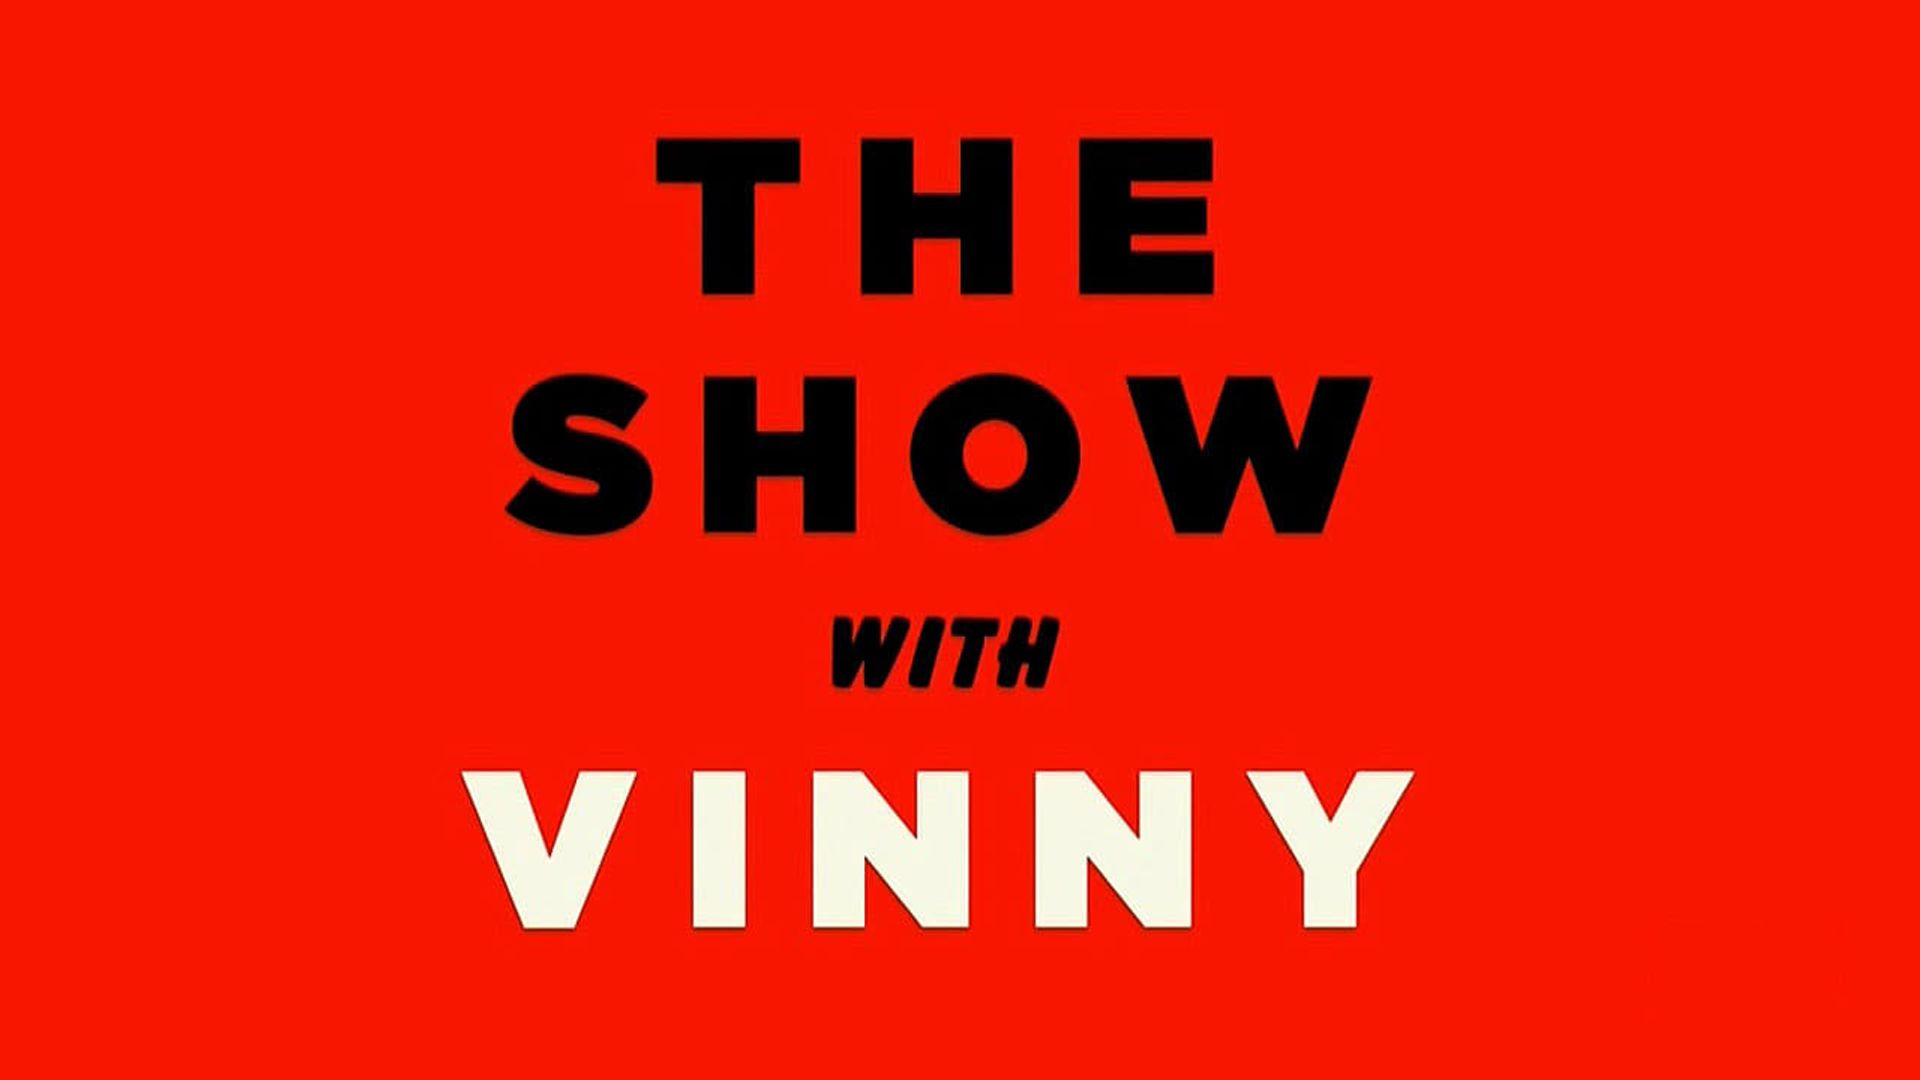 The Show with Vinny background